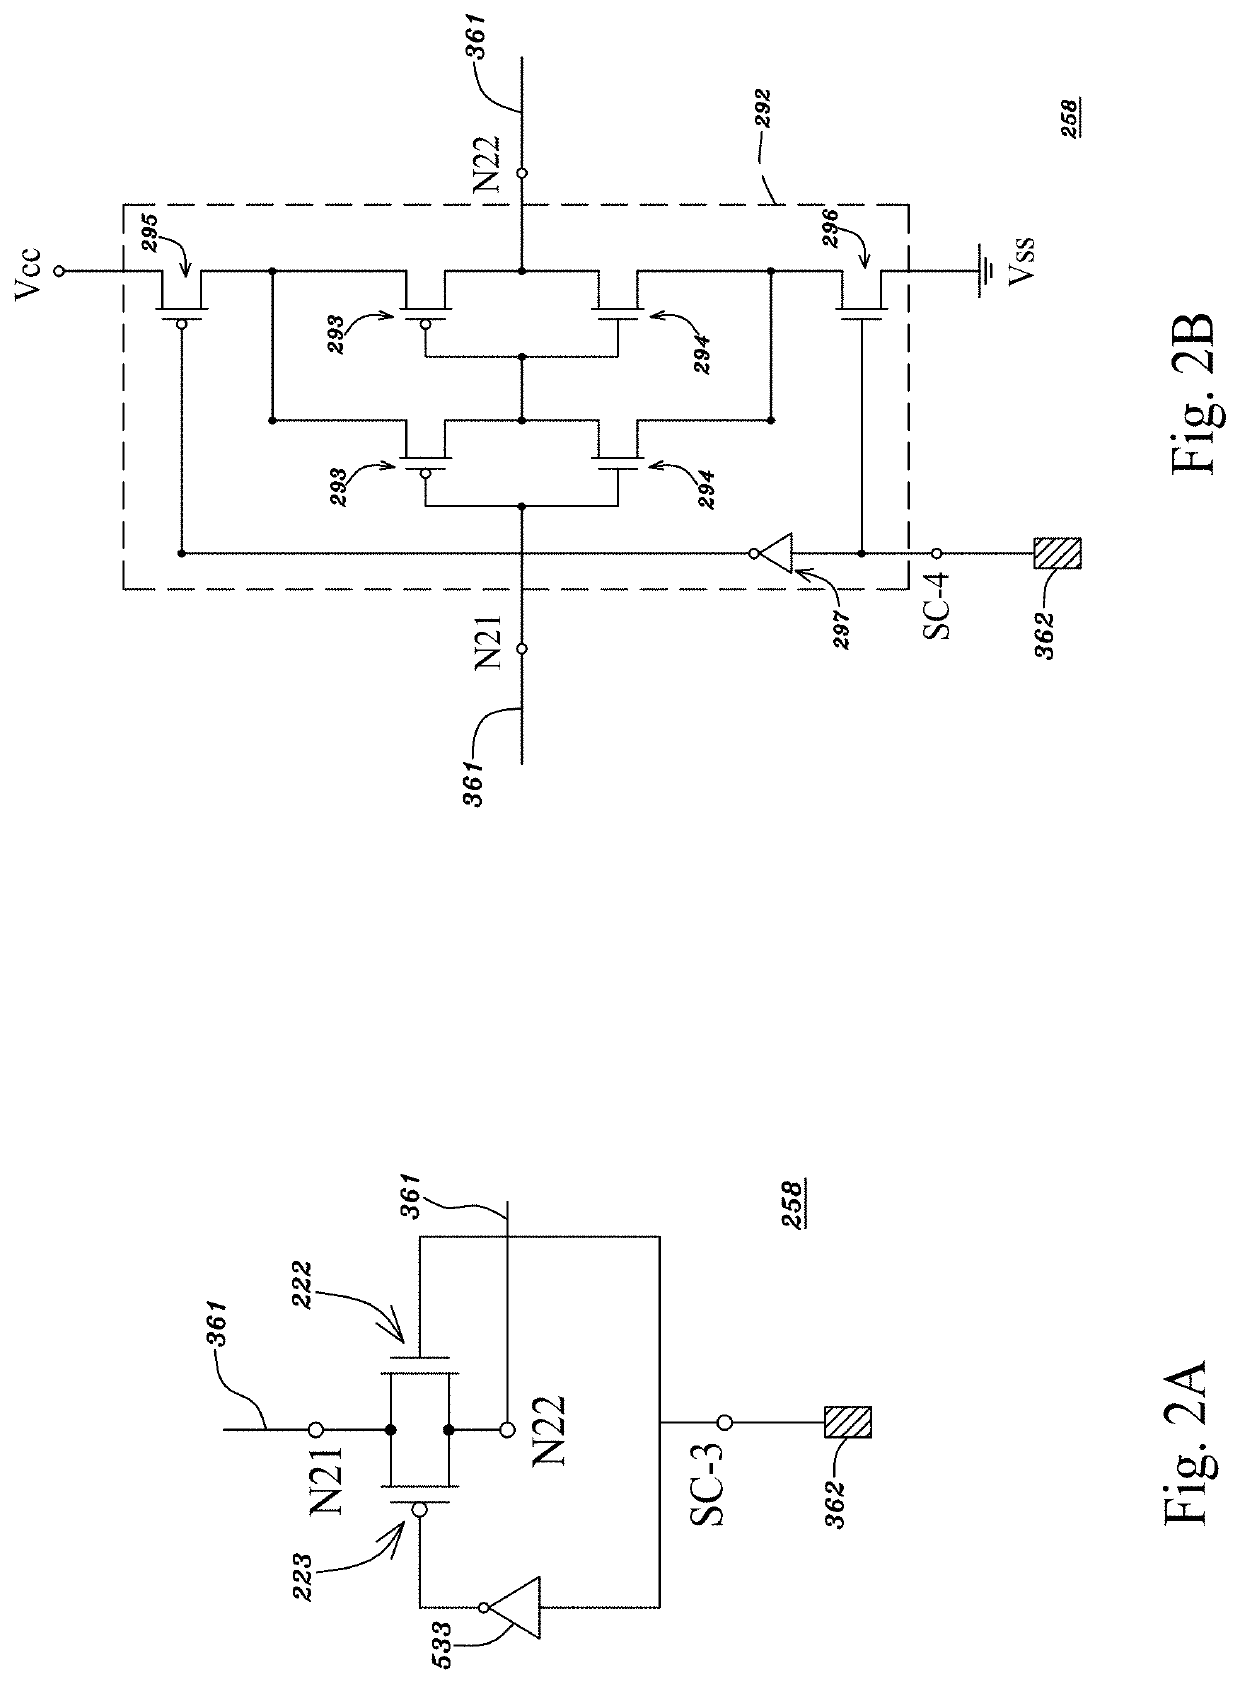 Logic drive using standard commodity programmable logic IC chips comprising non-volatile random access memory cells